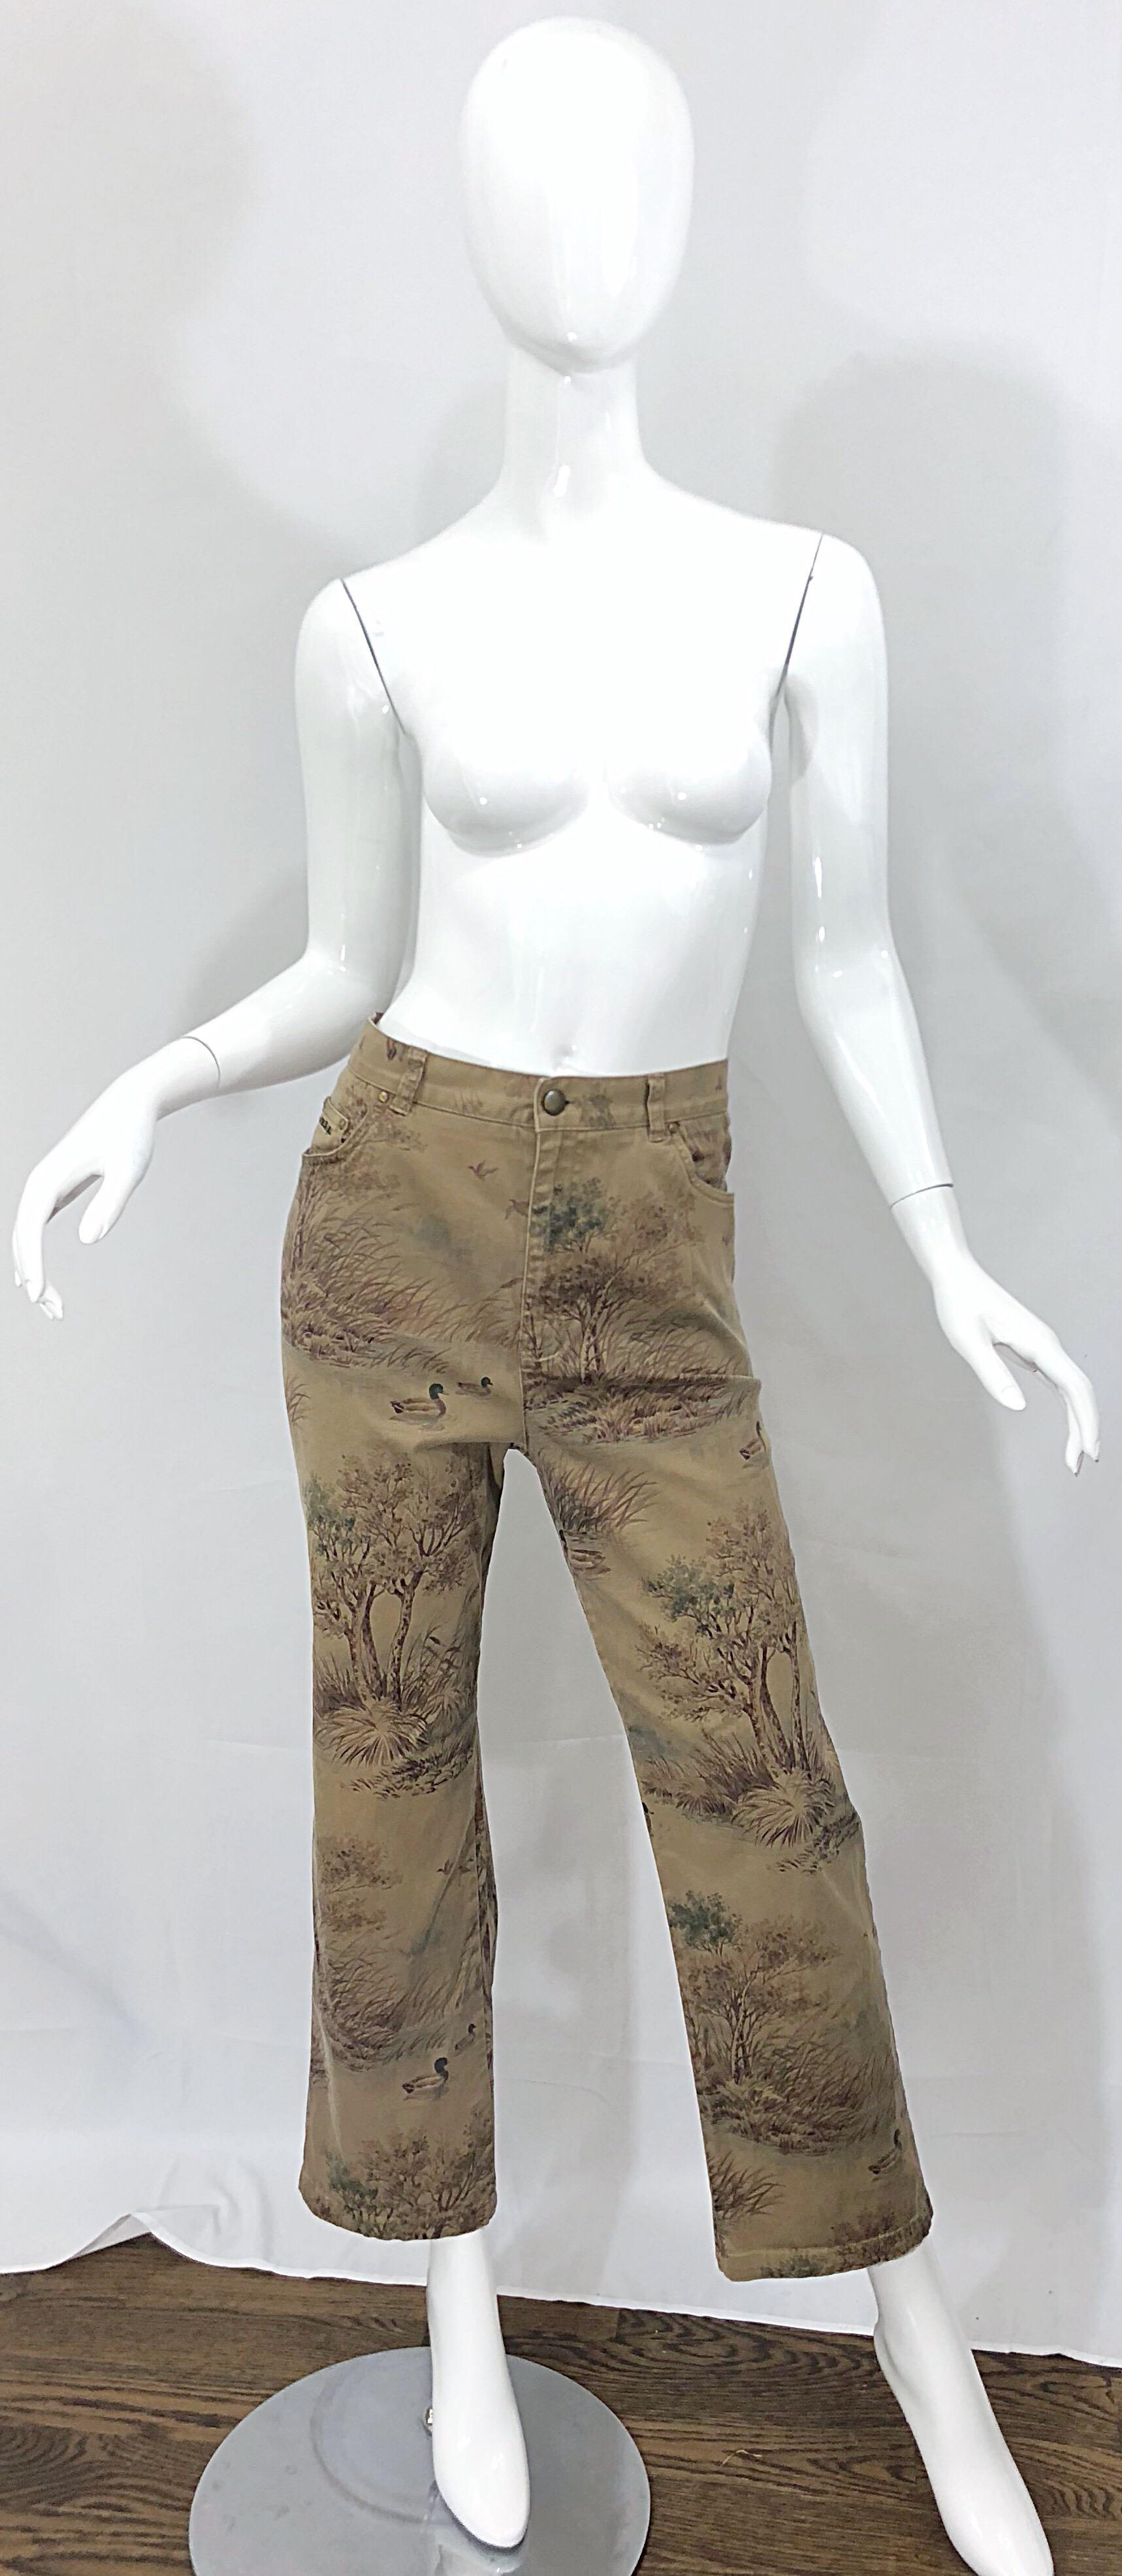 Rare vintage mid 90s RALPH LAUREN Size 14 camouflage high waisted tailored trousers! Features a tan / light brown backdrop with darker colors of brown and green. Sitting and flying ducks printed throughout. High waist fit with slim fitting legs that